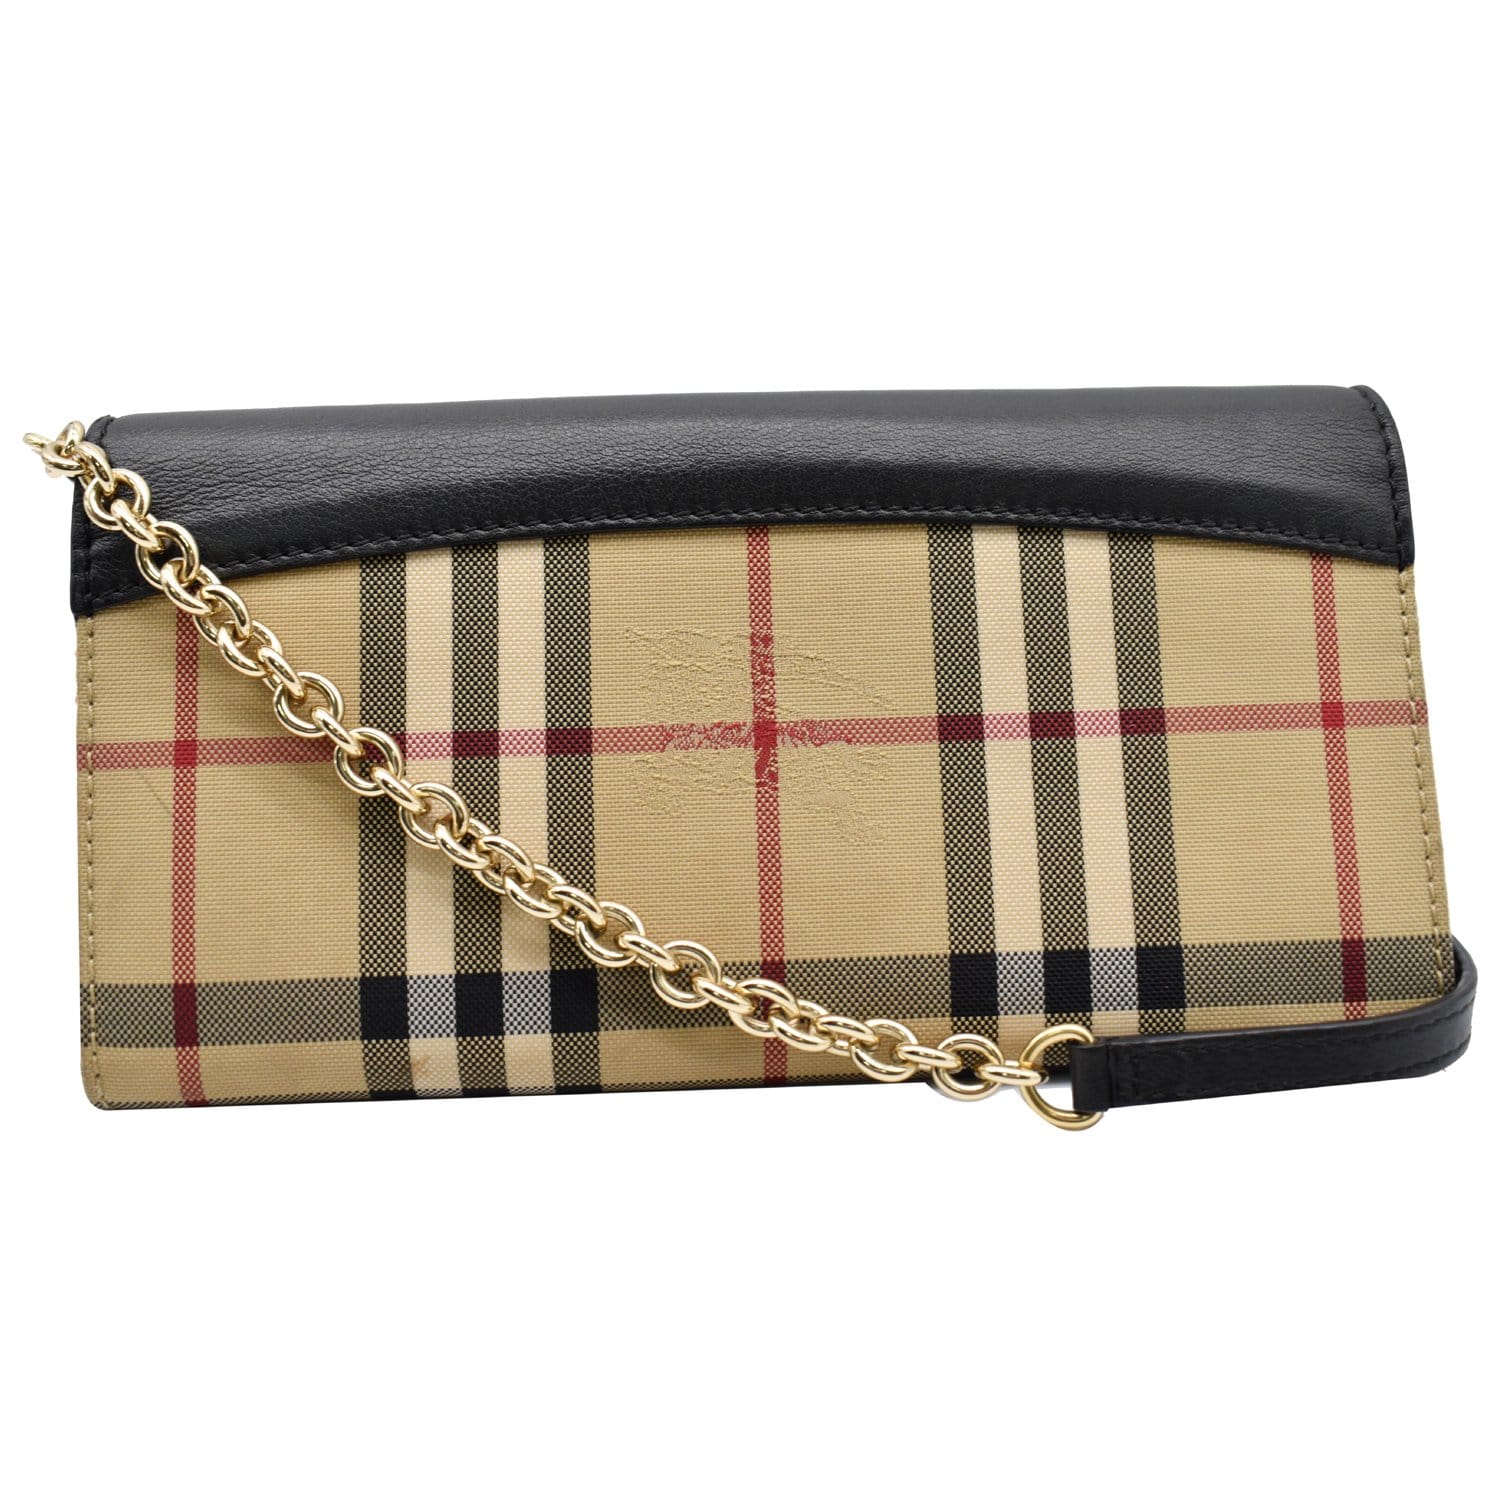 Burberry Card case on strap, Men's Accessories